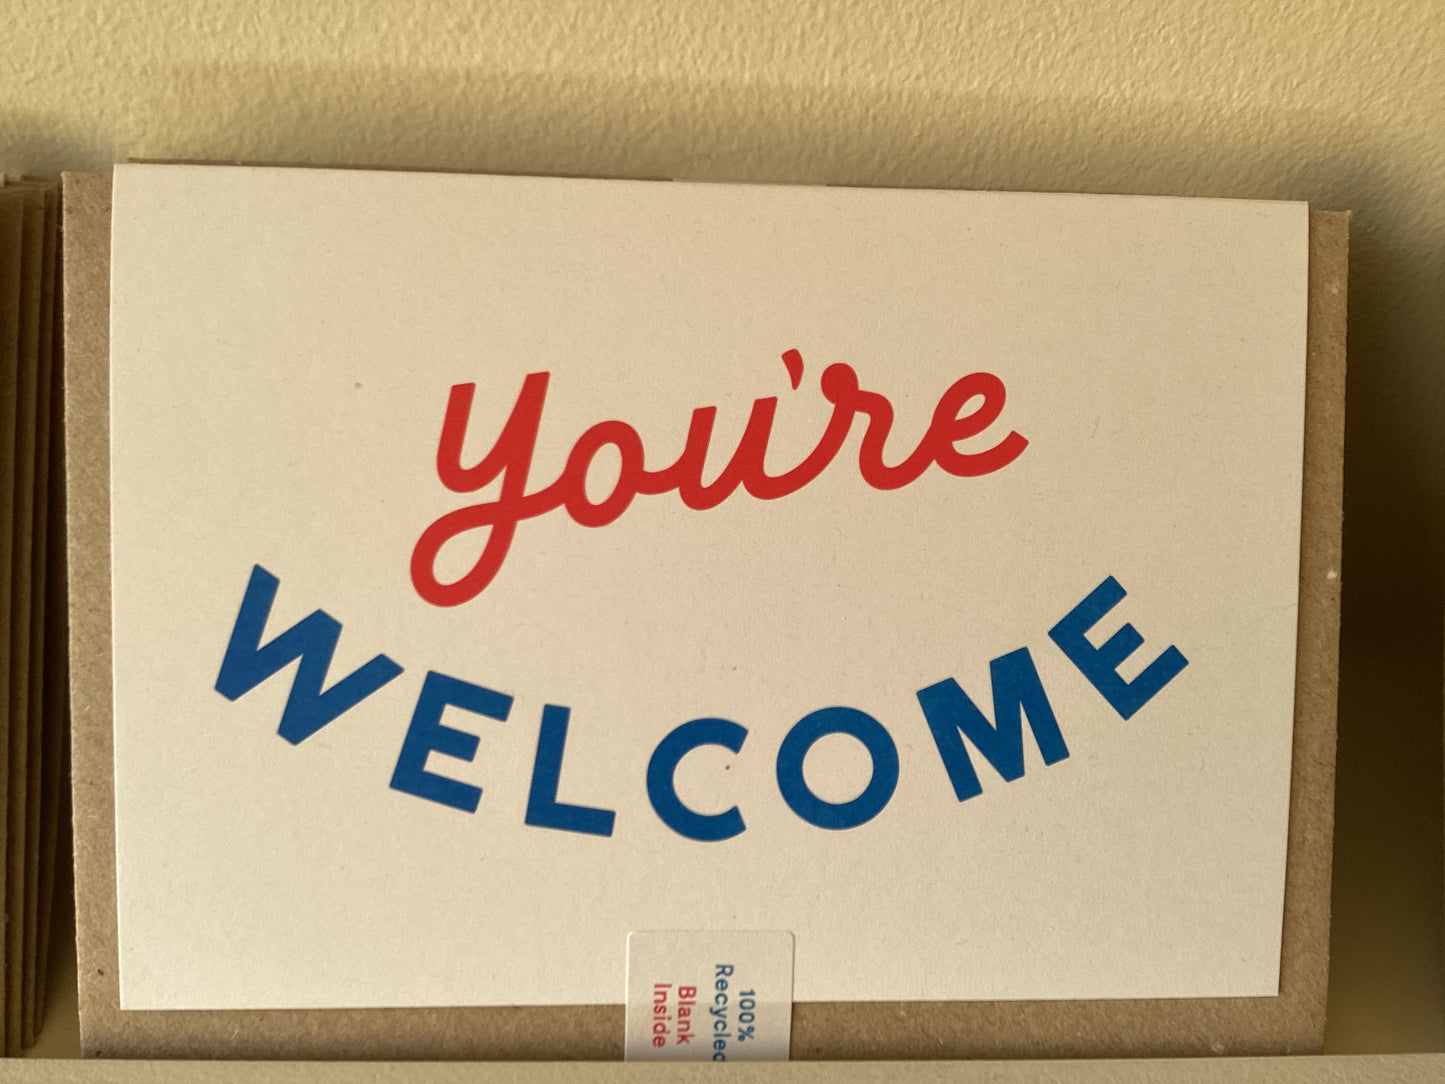 You're Welcome greeting card